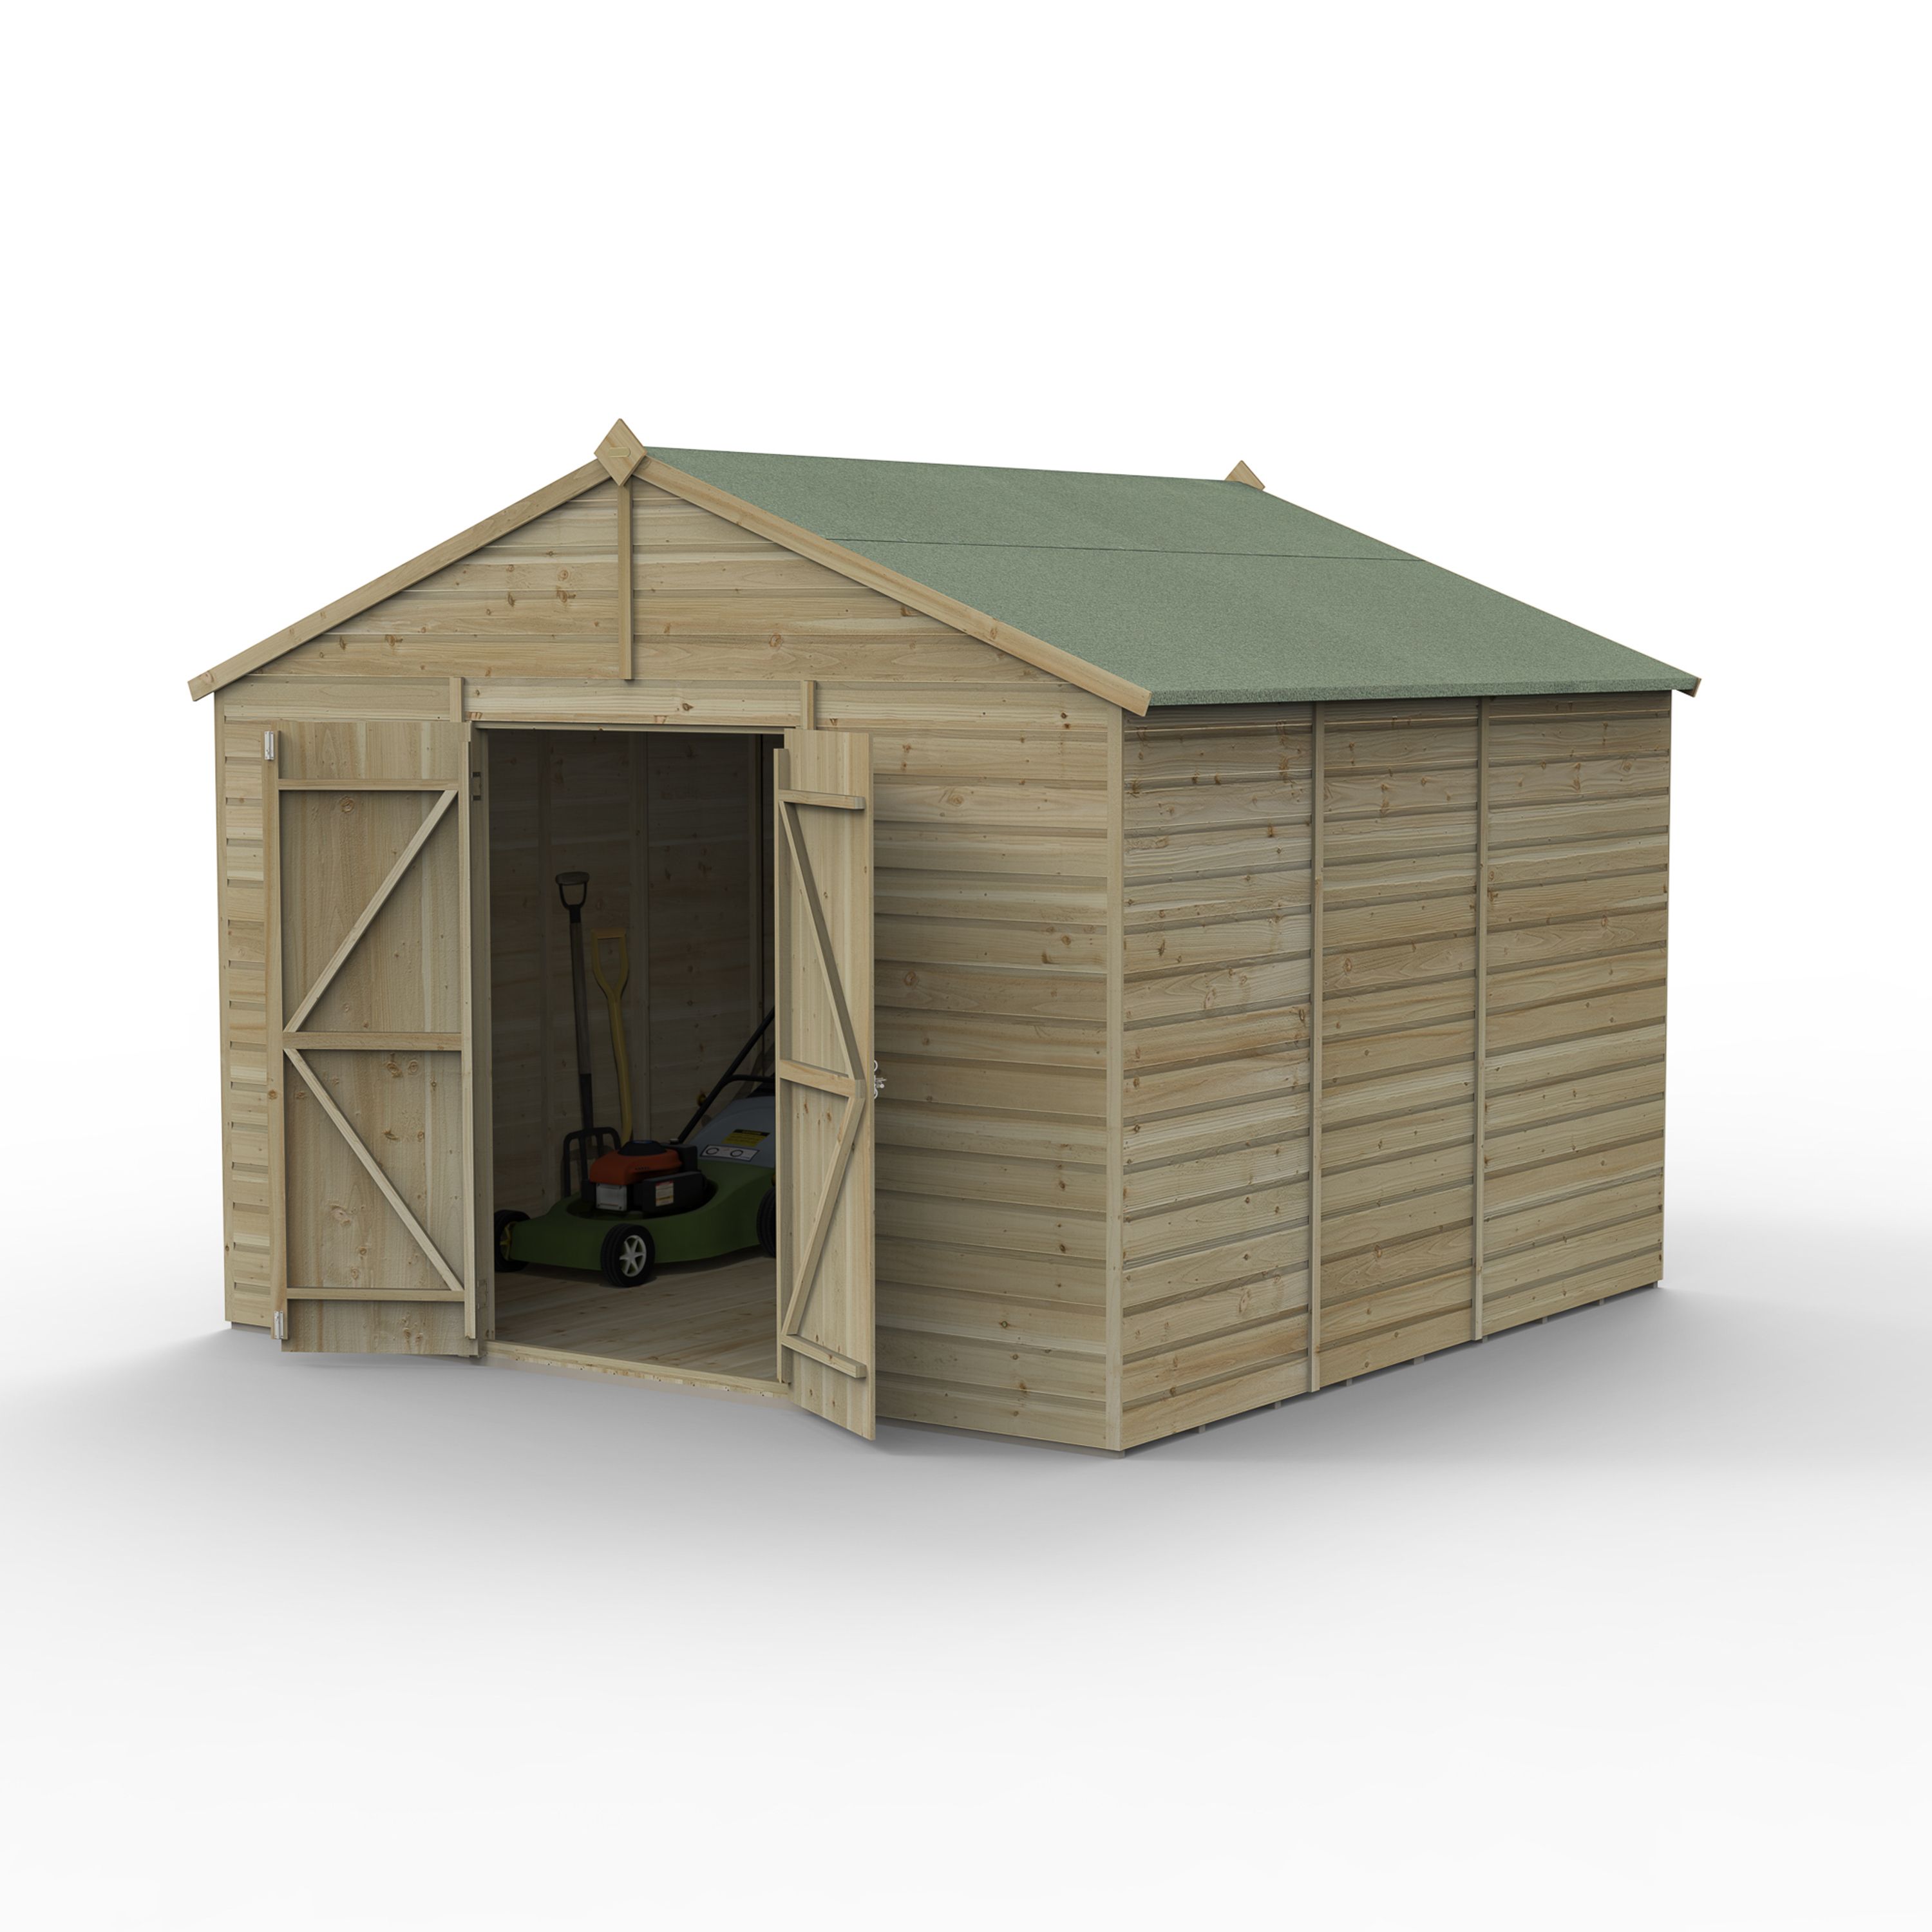 Forest Garden Beckwood 10x10 ft Apex Natural timber Wooden 2 door Shed with floor